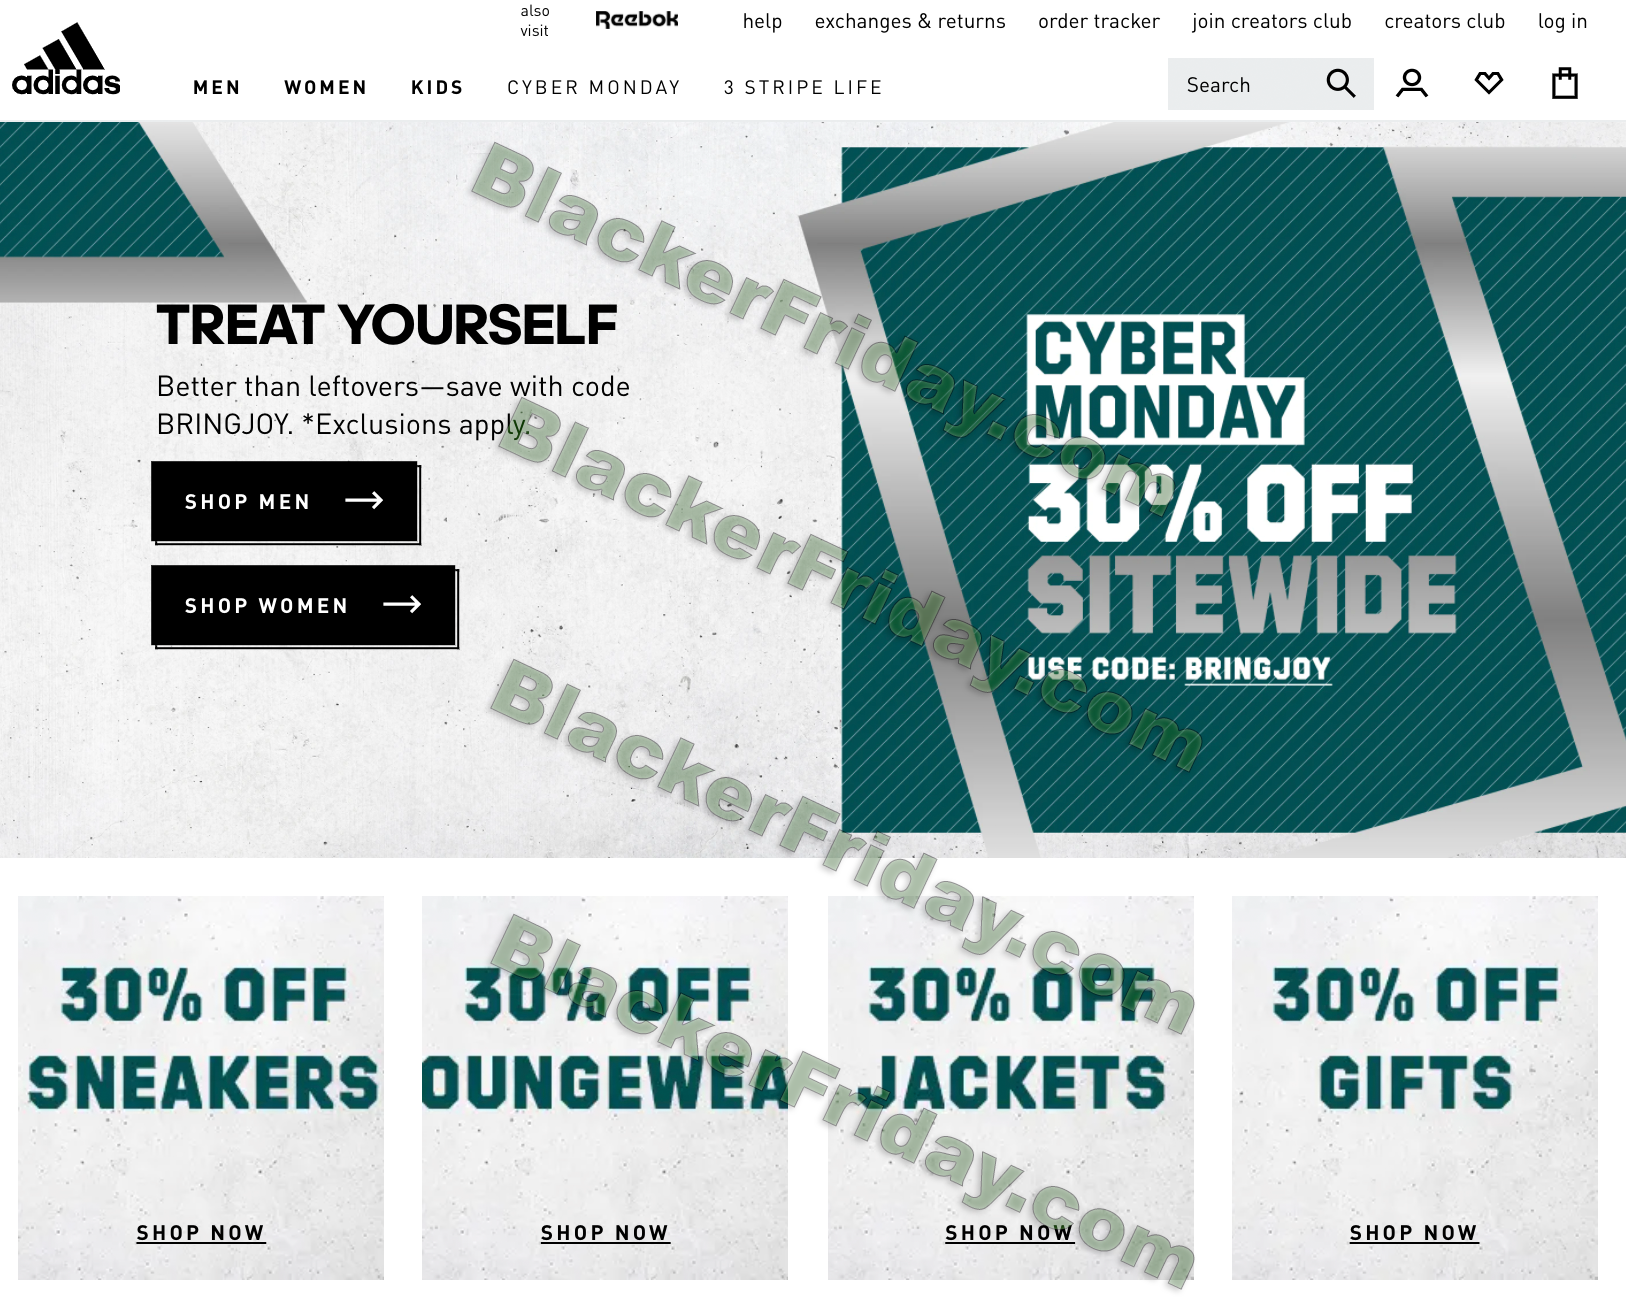 Adidas Cyber Monday 2021 Sale - What to 